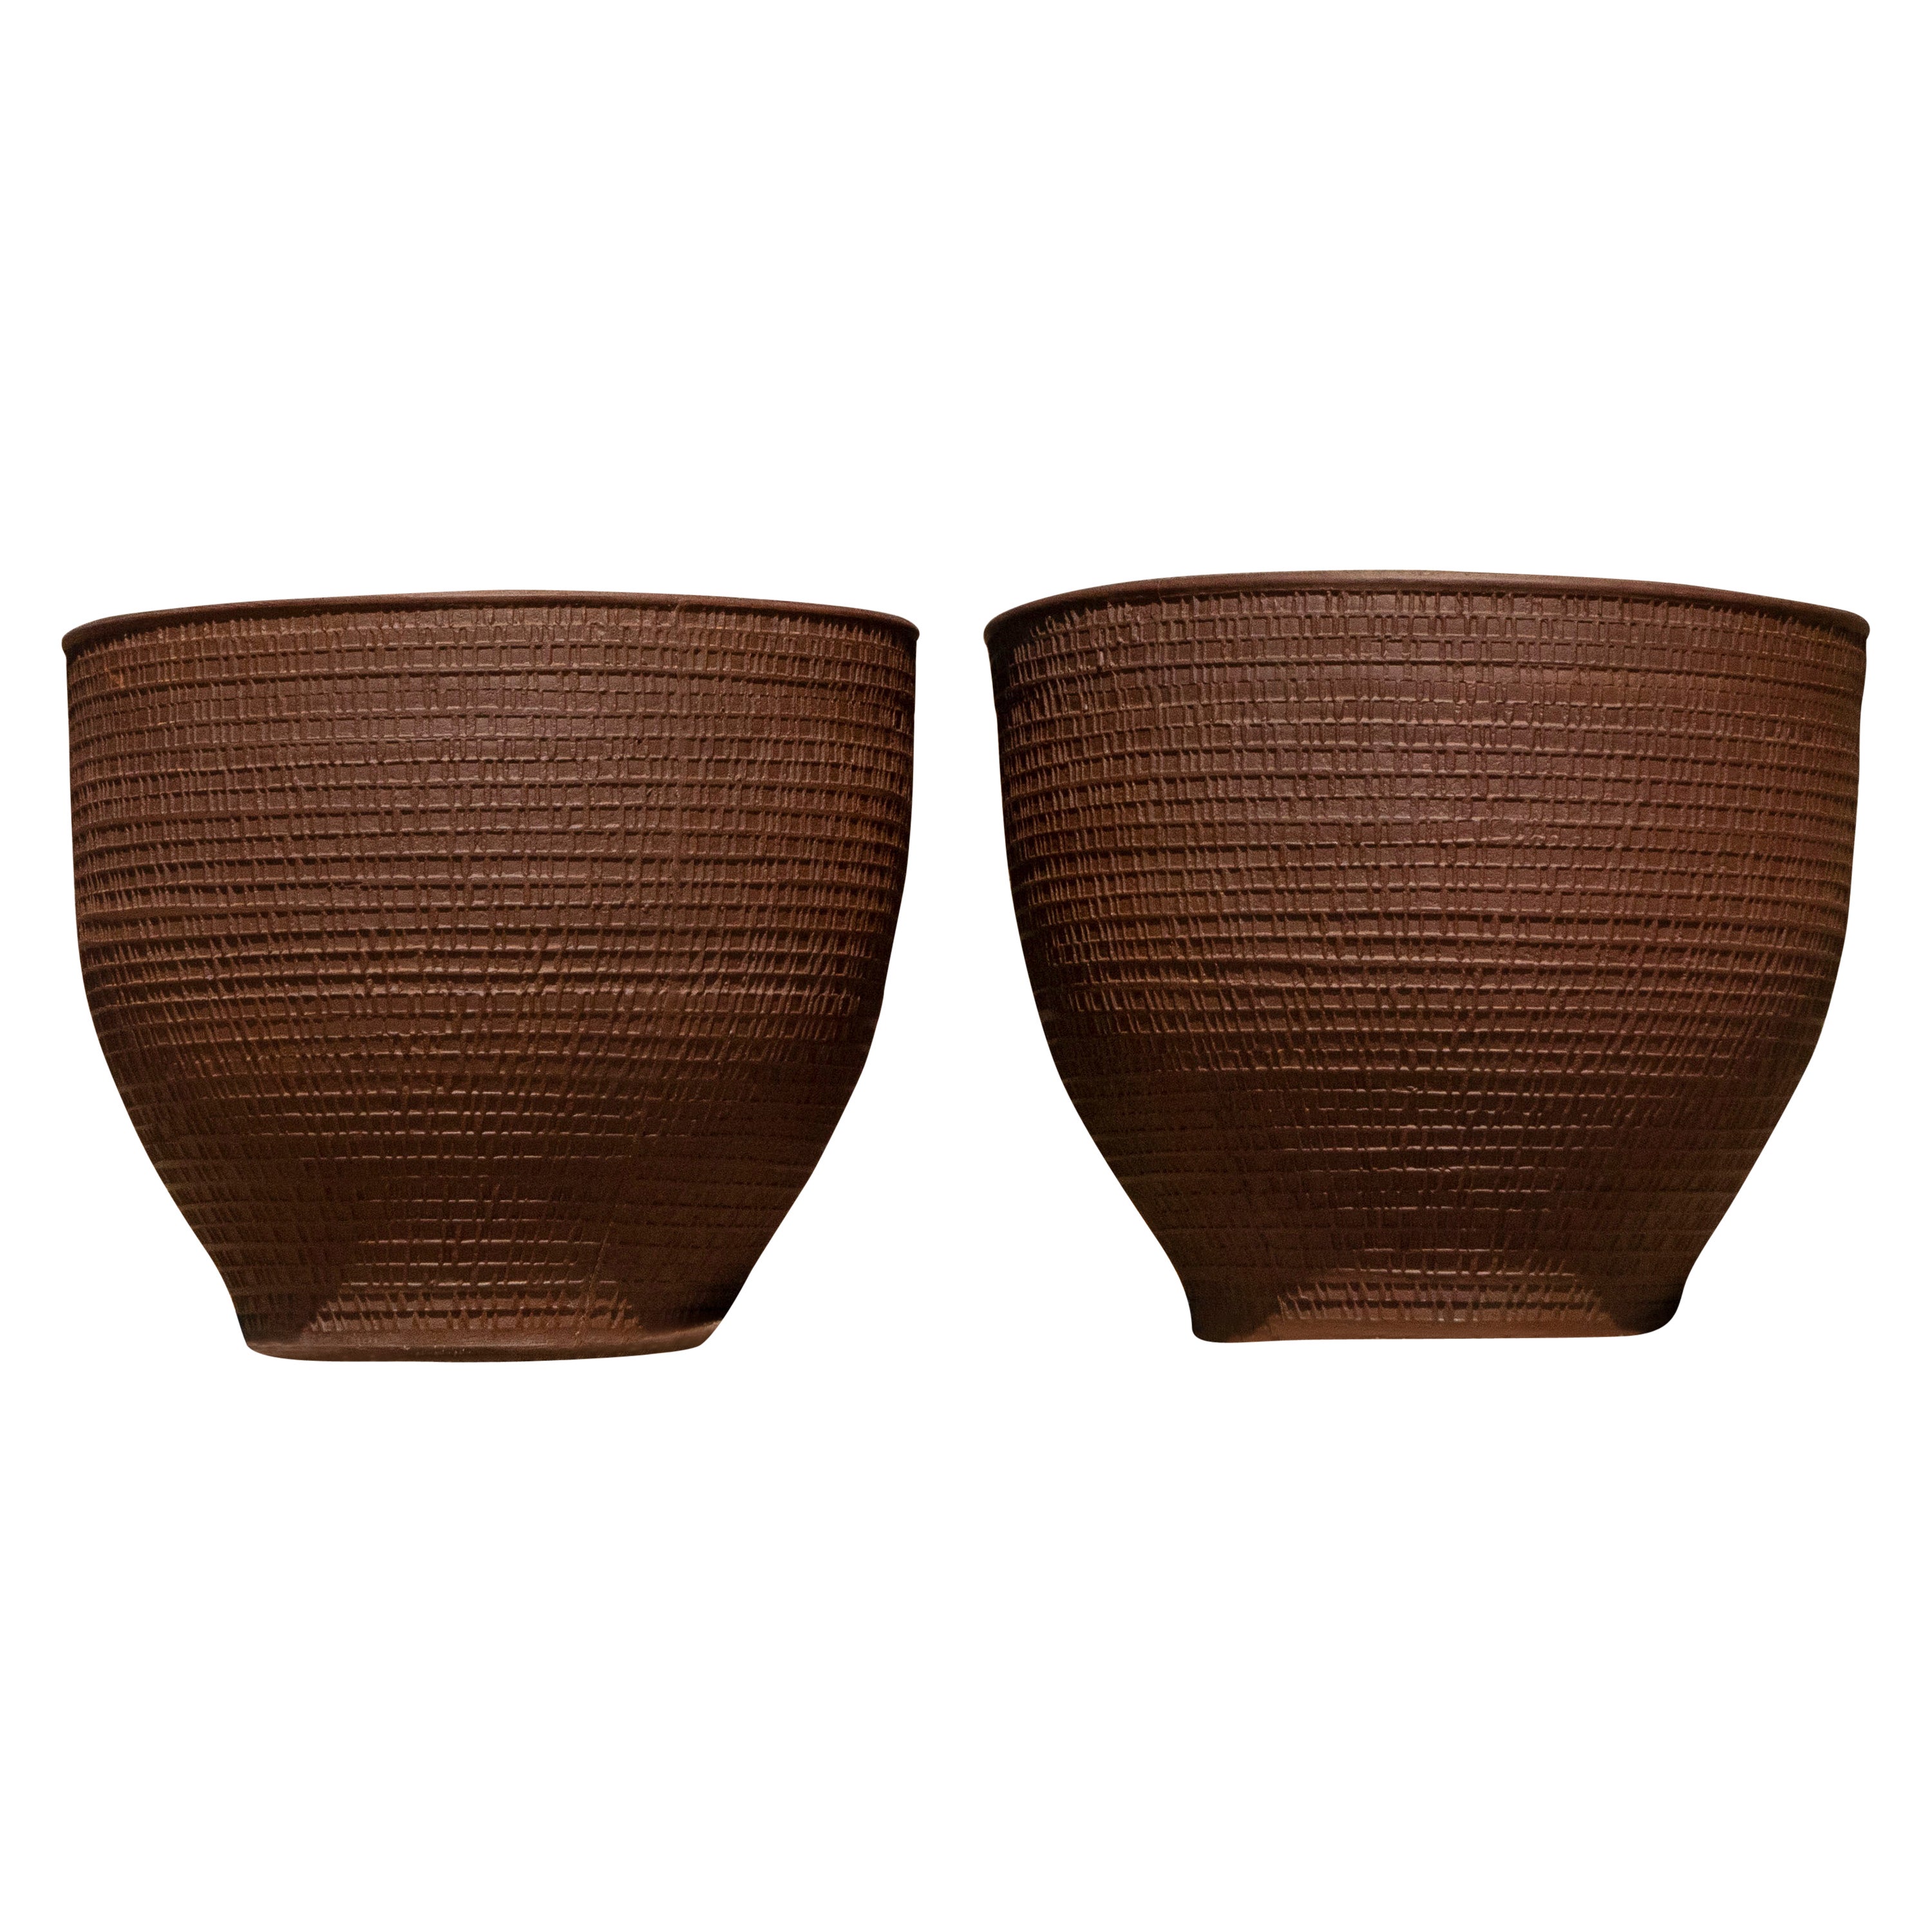 David Cressey Pro Artisan Pair of 'Rectangle' Architectural Pottery Planters For Sale